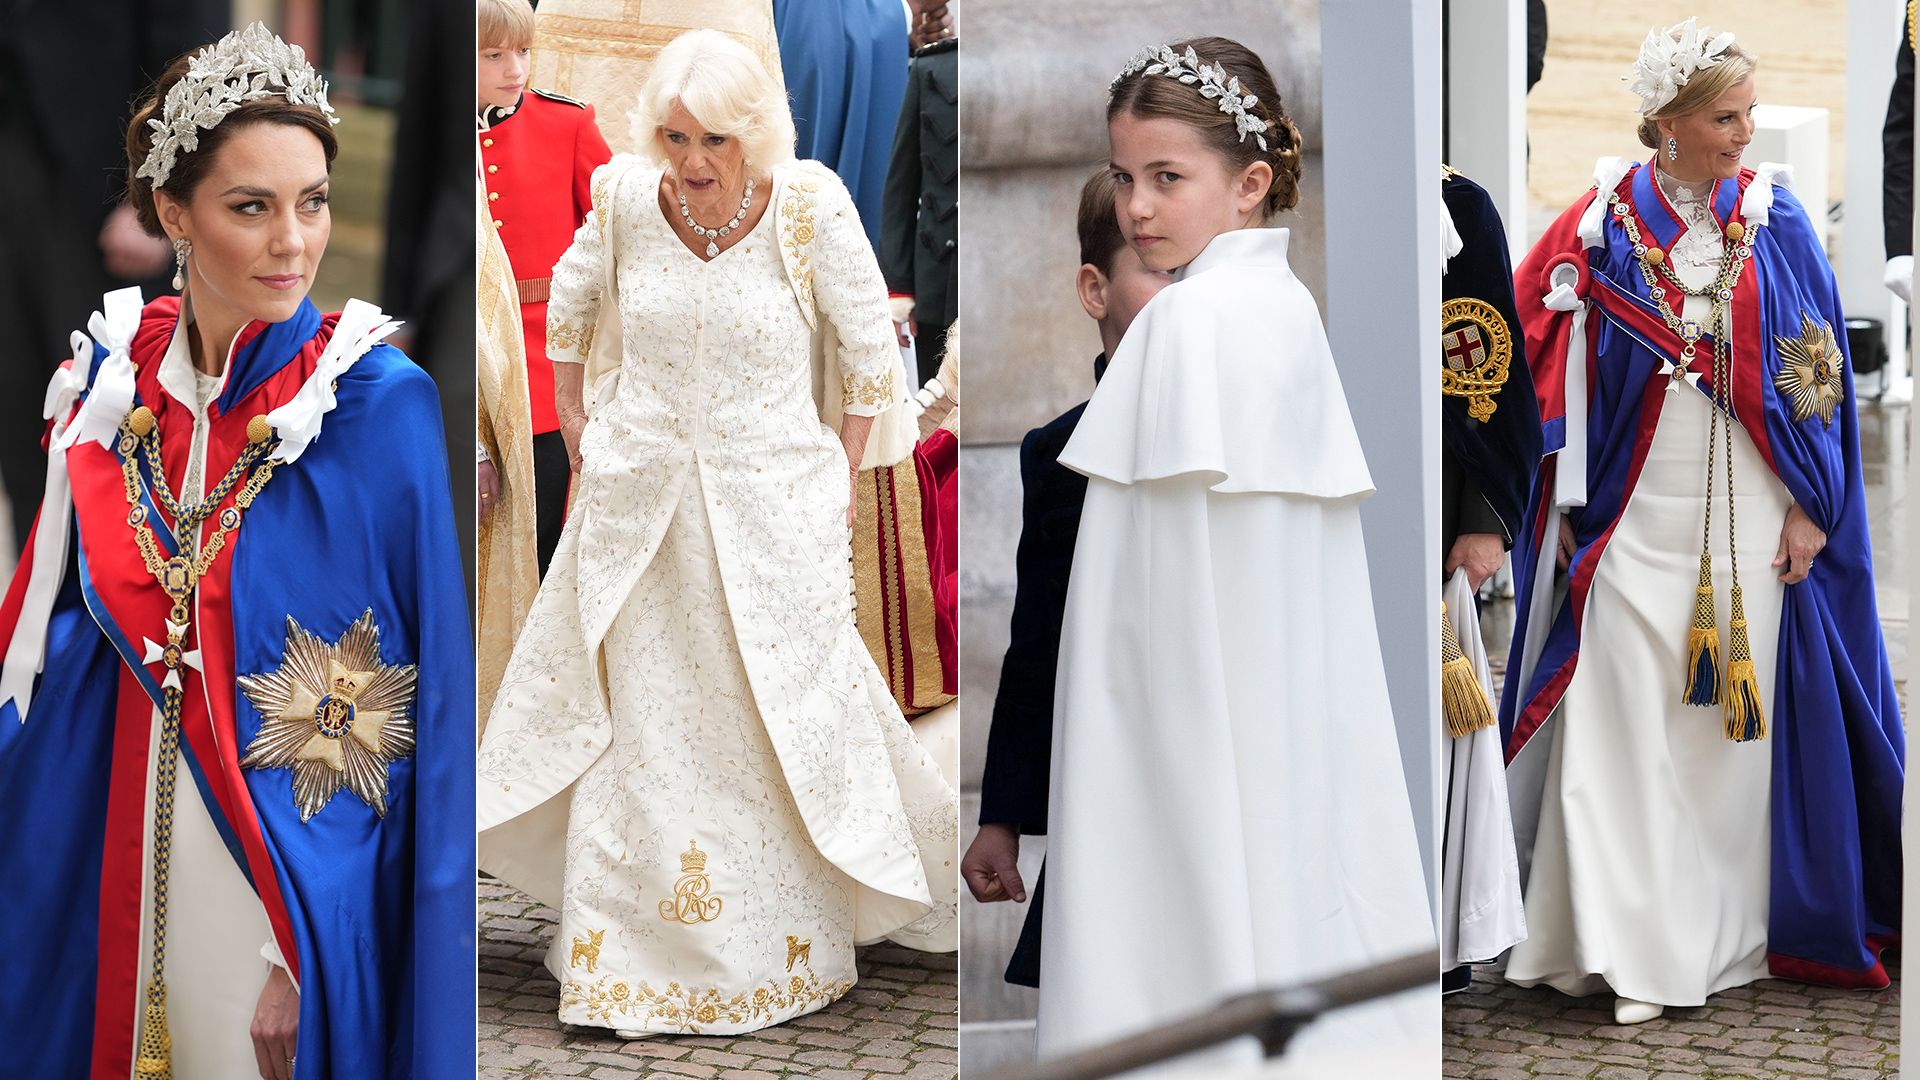 Why did royal ladies wear white for King Charles III’s coronation?